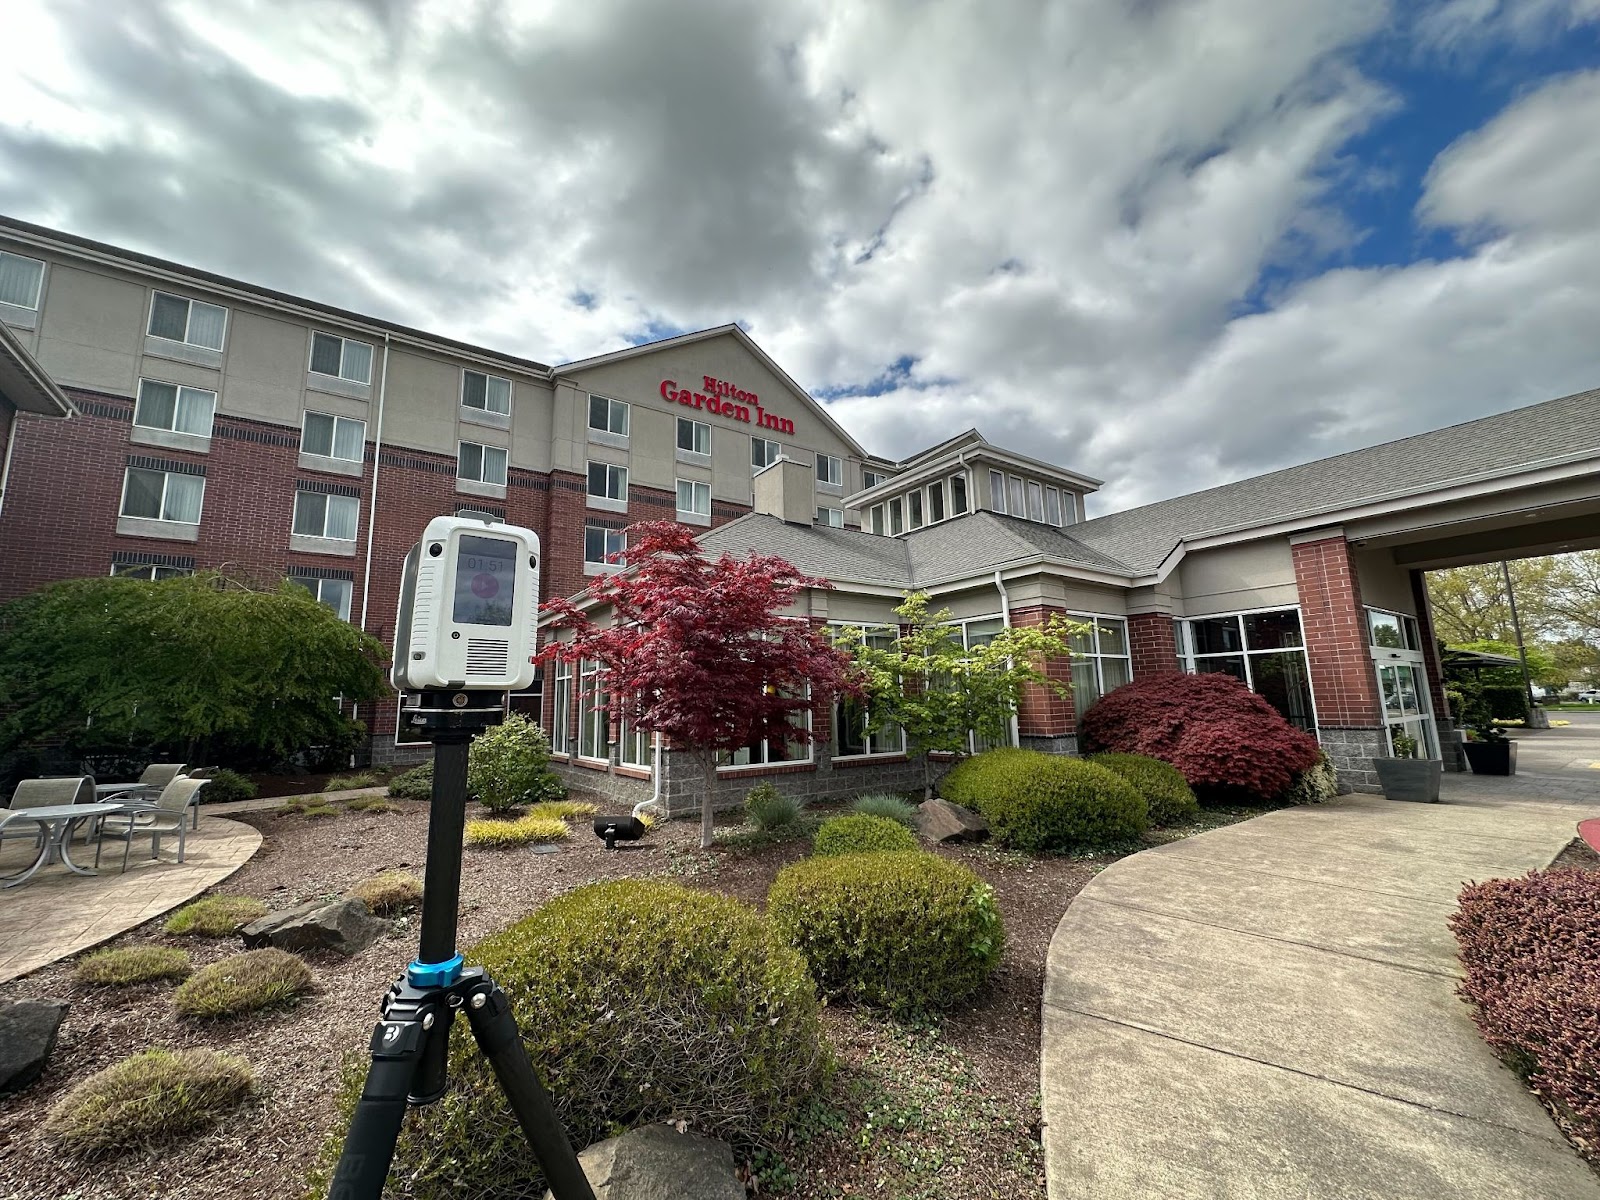 On-site scanning of the exterior utilizing the Leica RTC360